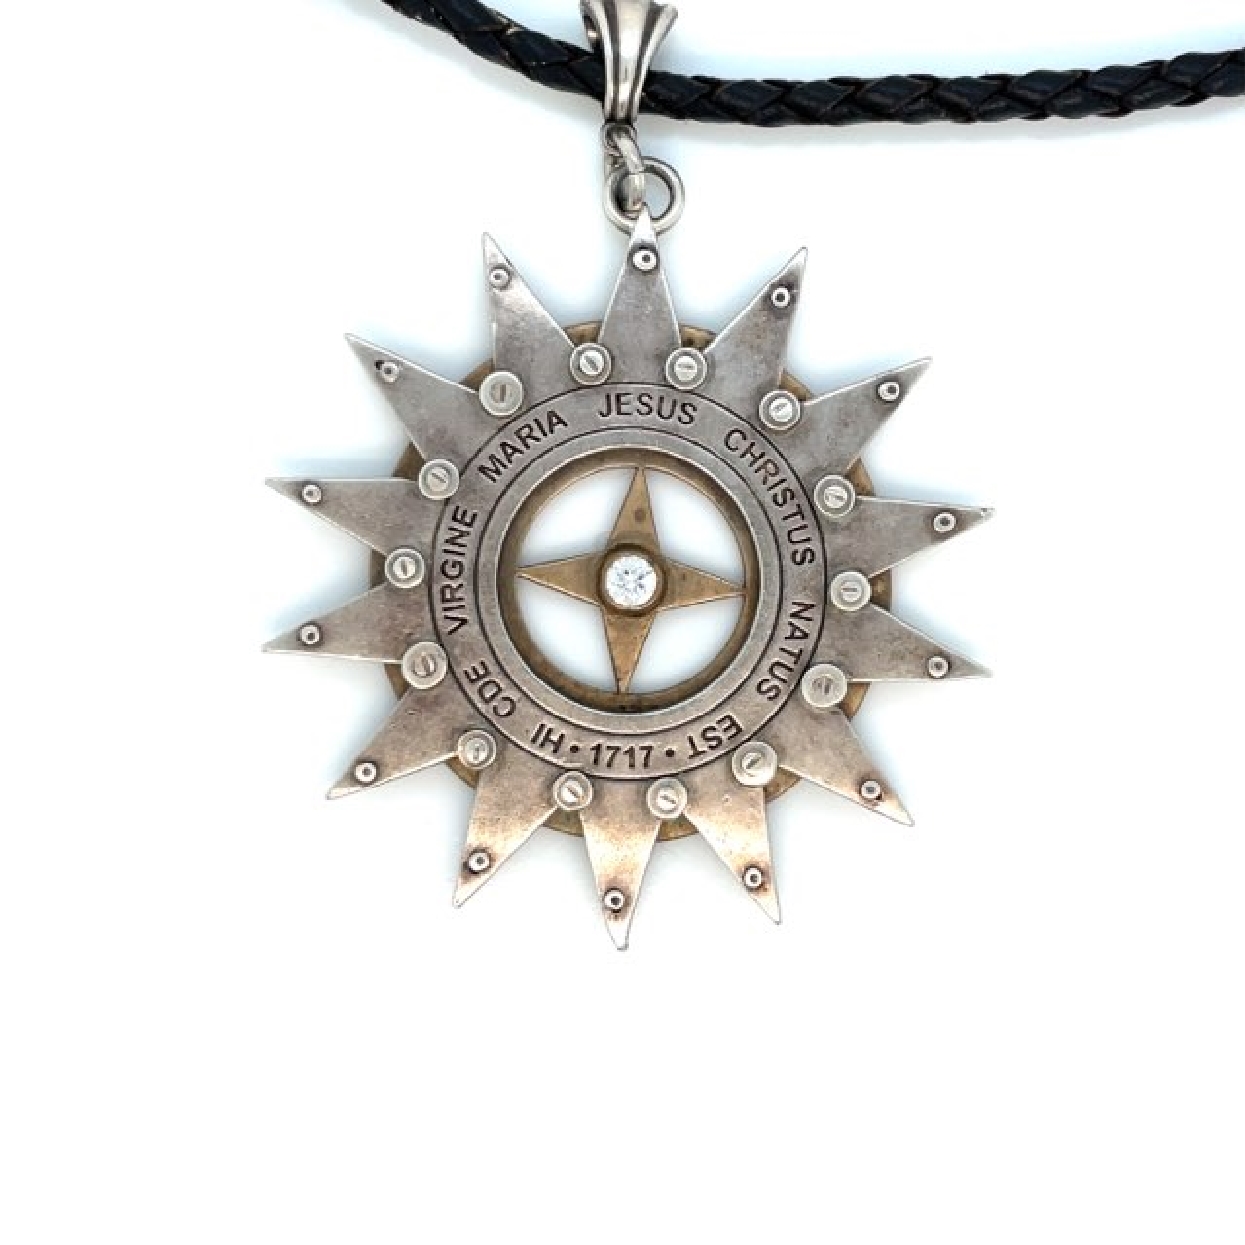 Sterling Silver and Brass Holy Sepulcher Star Pendant on a Leather  and Sterling Silver Necklace

30 Inches